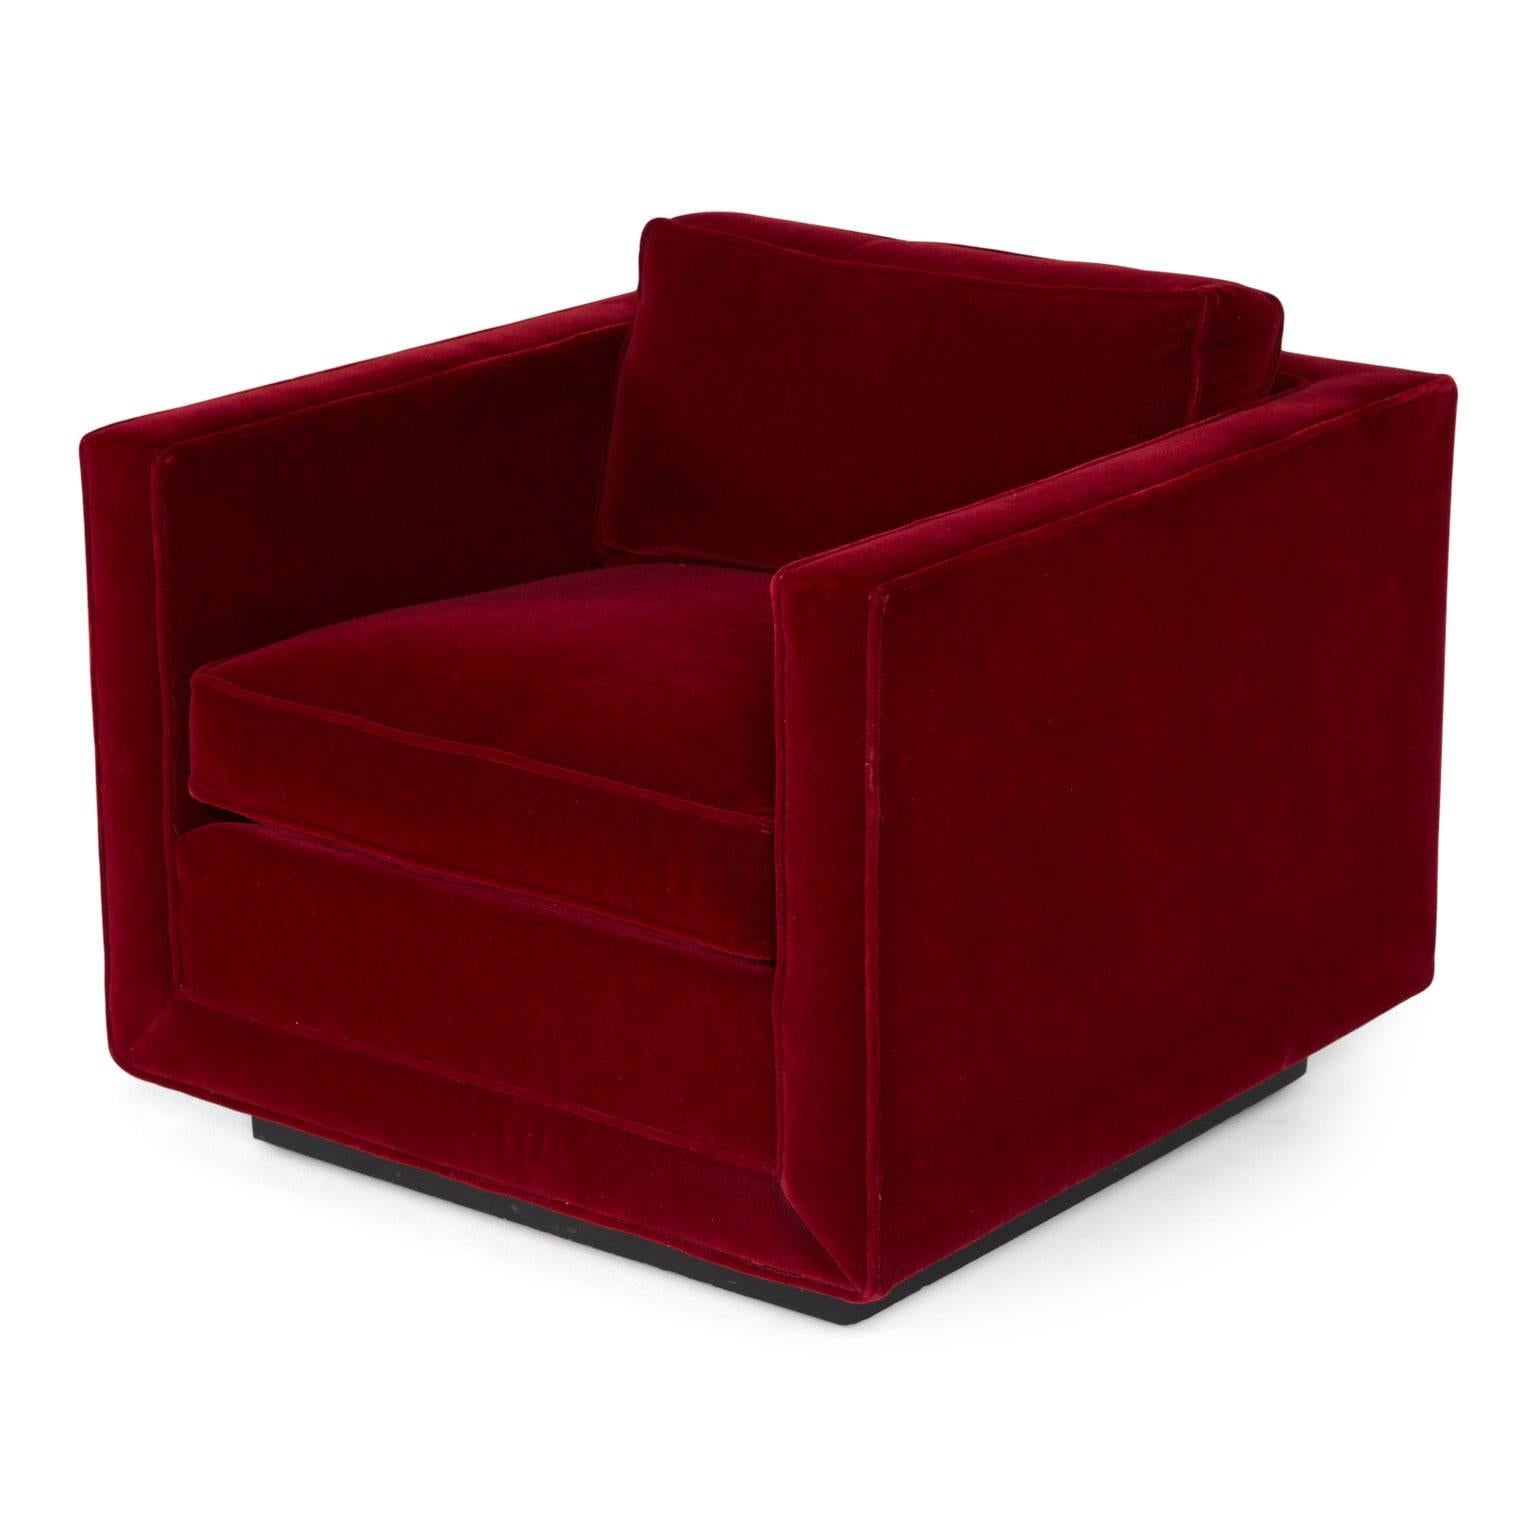 This armchair by Nicos Zographos is upholstered with lustrously red mohair, in exquisite original condition. Its modular design is faithful to the 1960s, but also transcends in style due to its rich, versatile hue. Made in the USA and signed with a